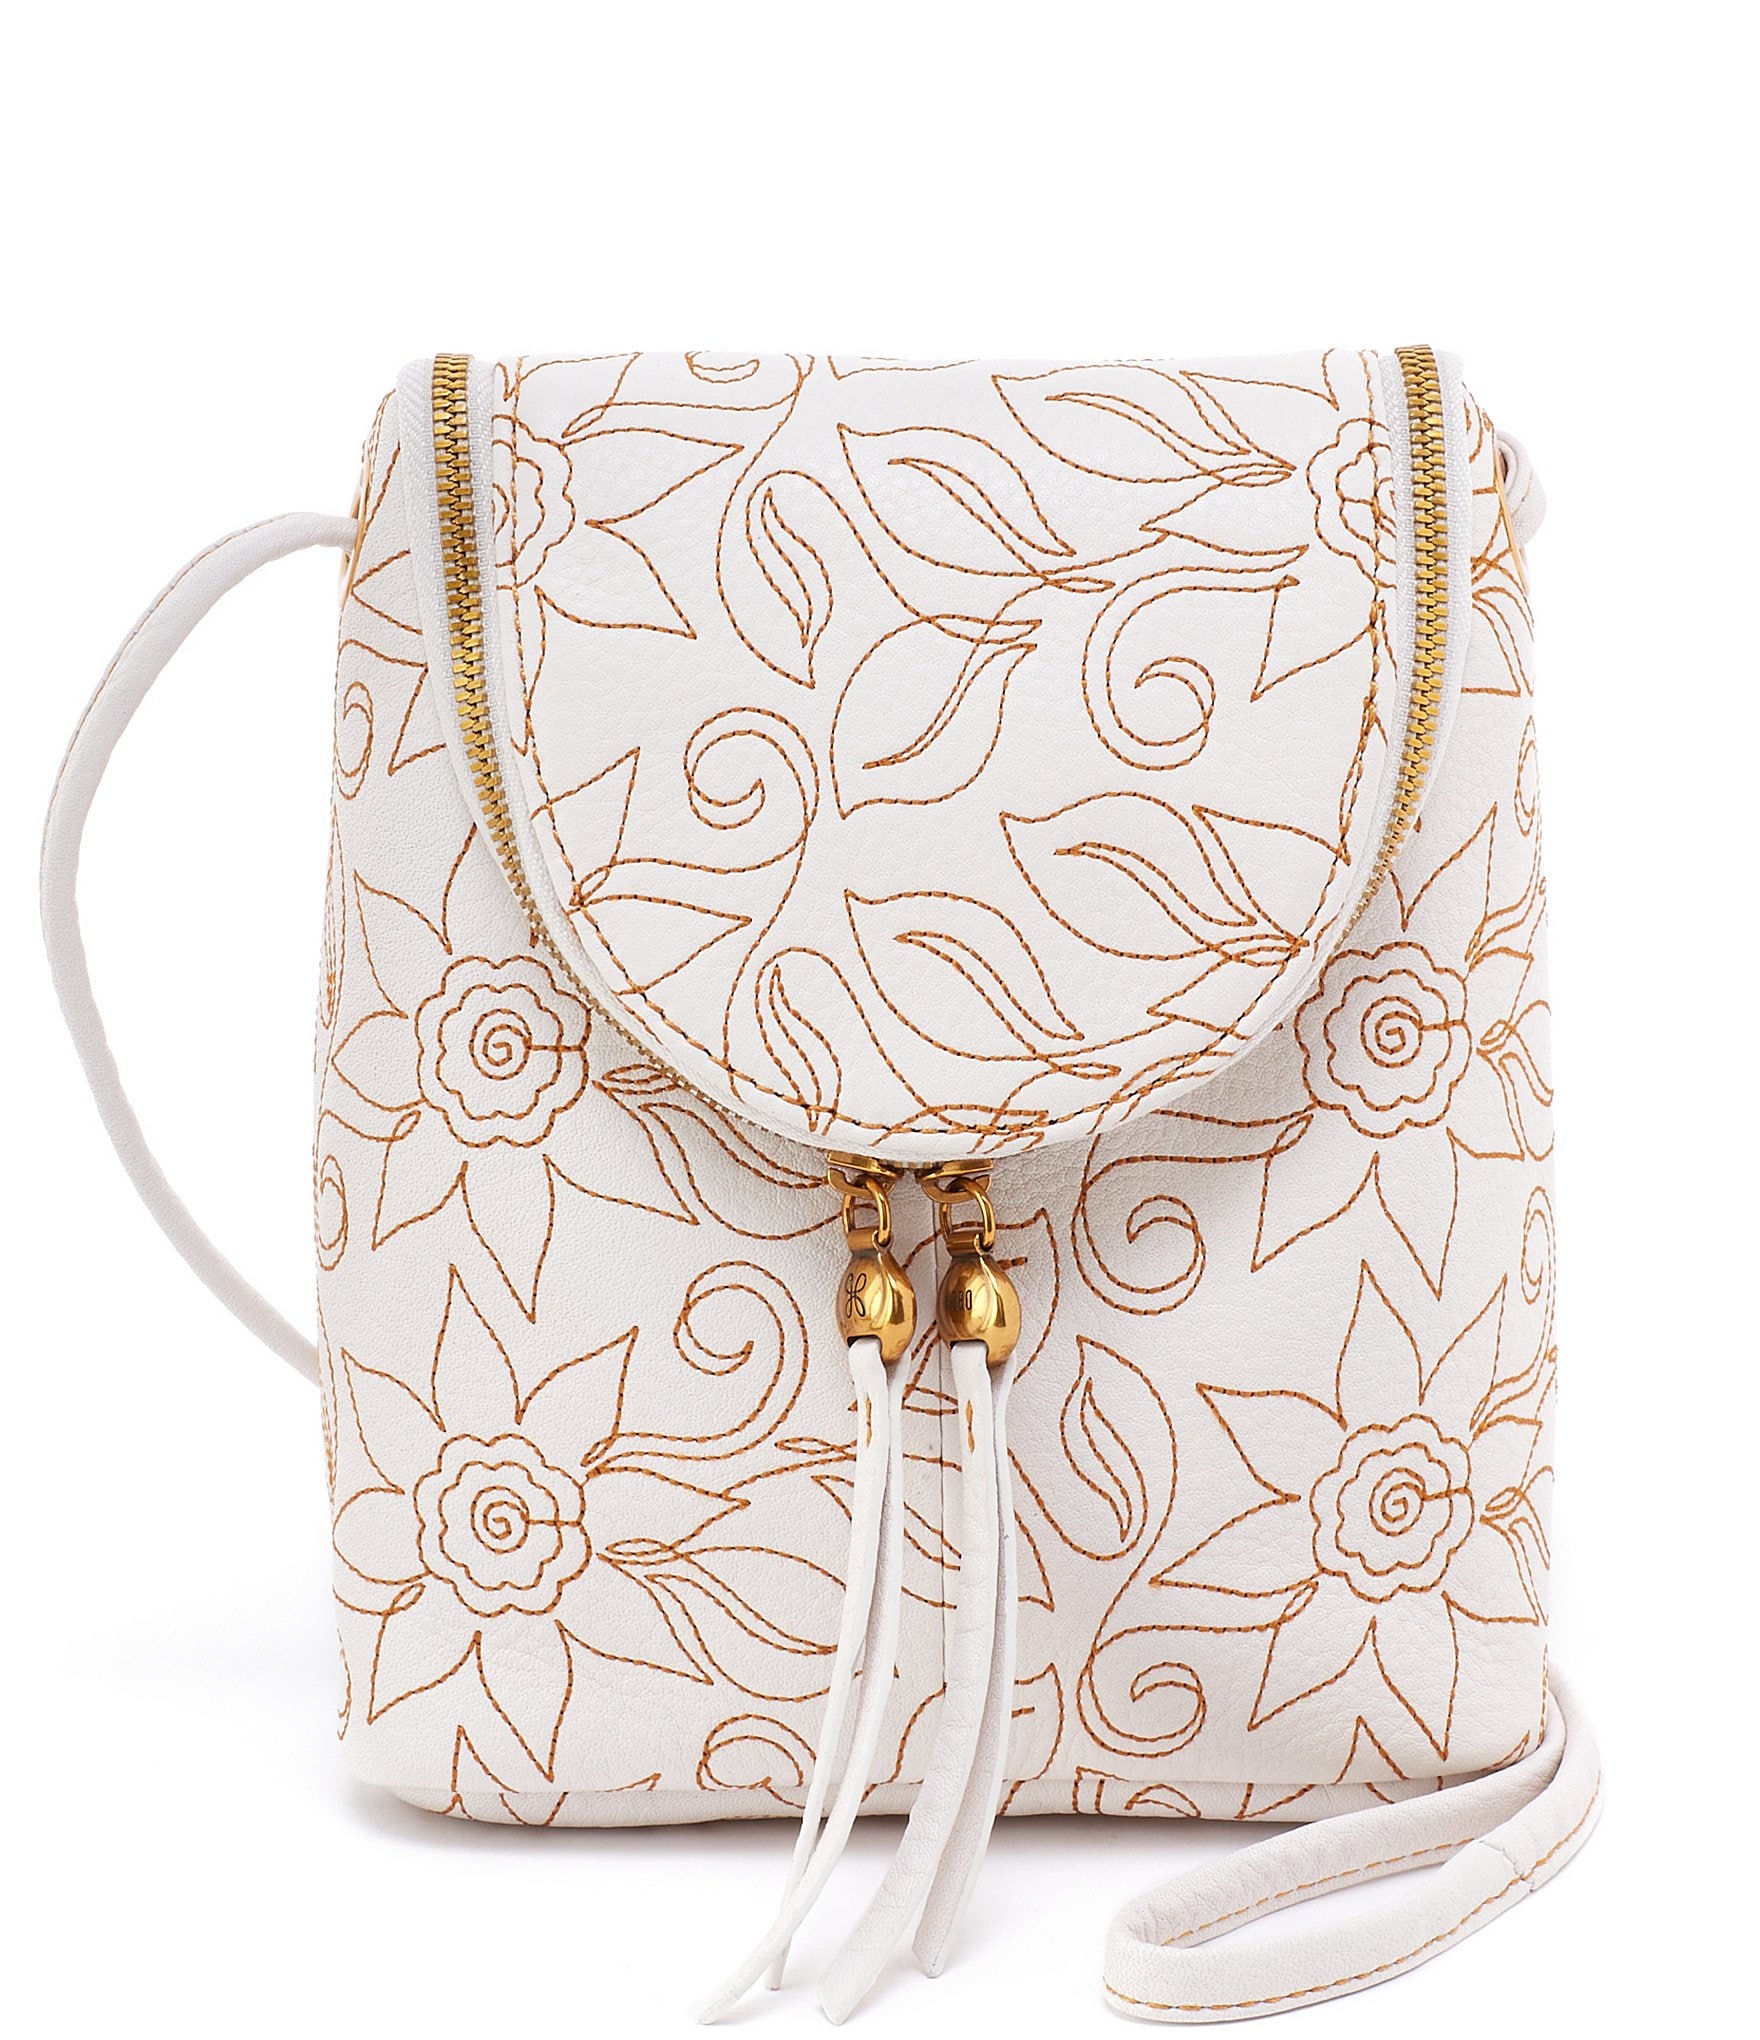 Floral Embroidery Crossbody Bag